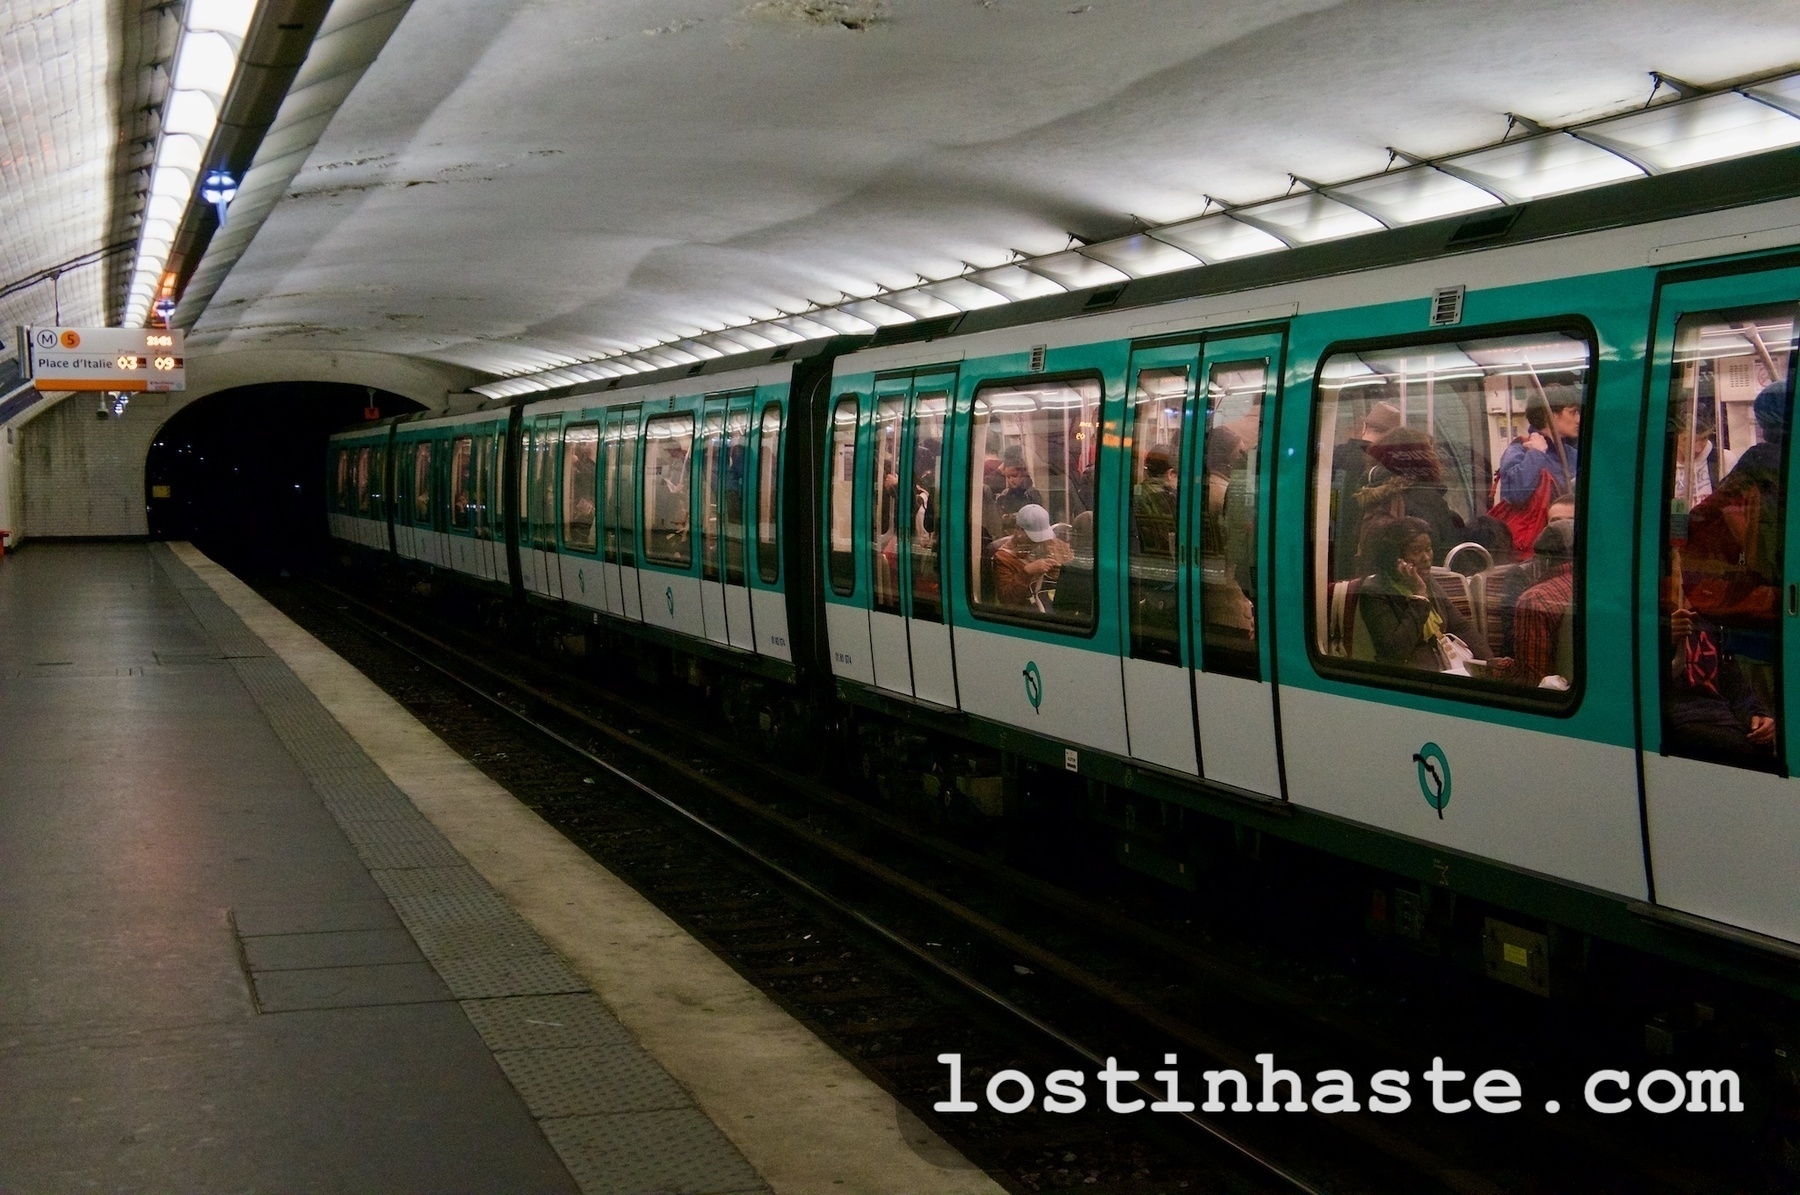 A green metro train is stationary at an underground platform with passengers visible through windows, under a curved white ceiling with lights. The text 'lostinhaste.com' is overlaid at the bottom.